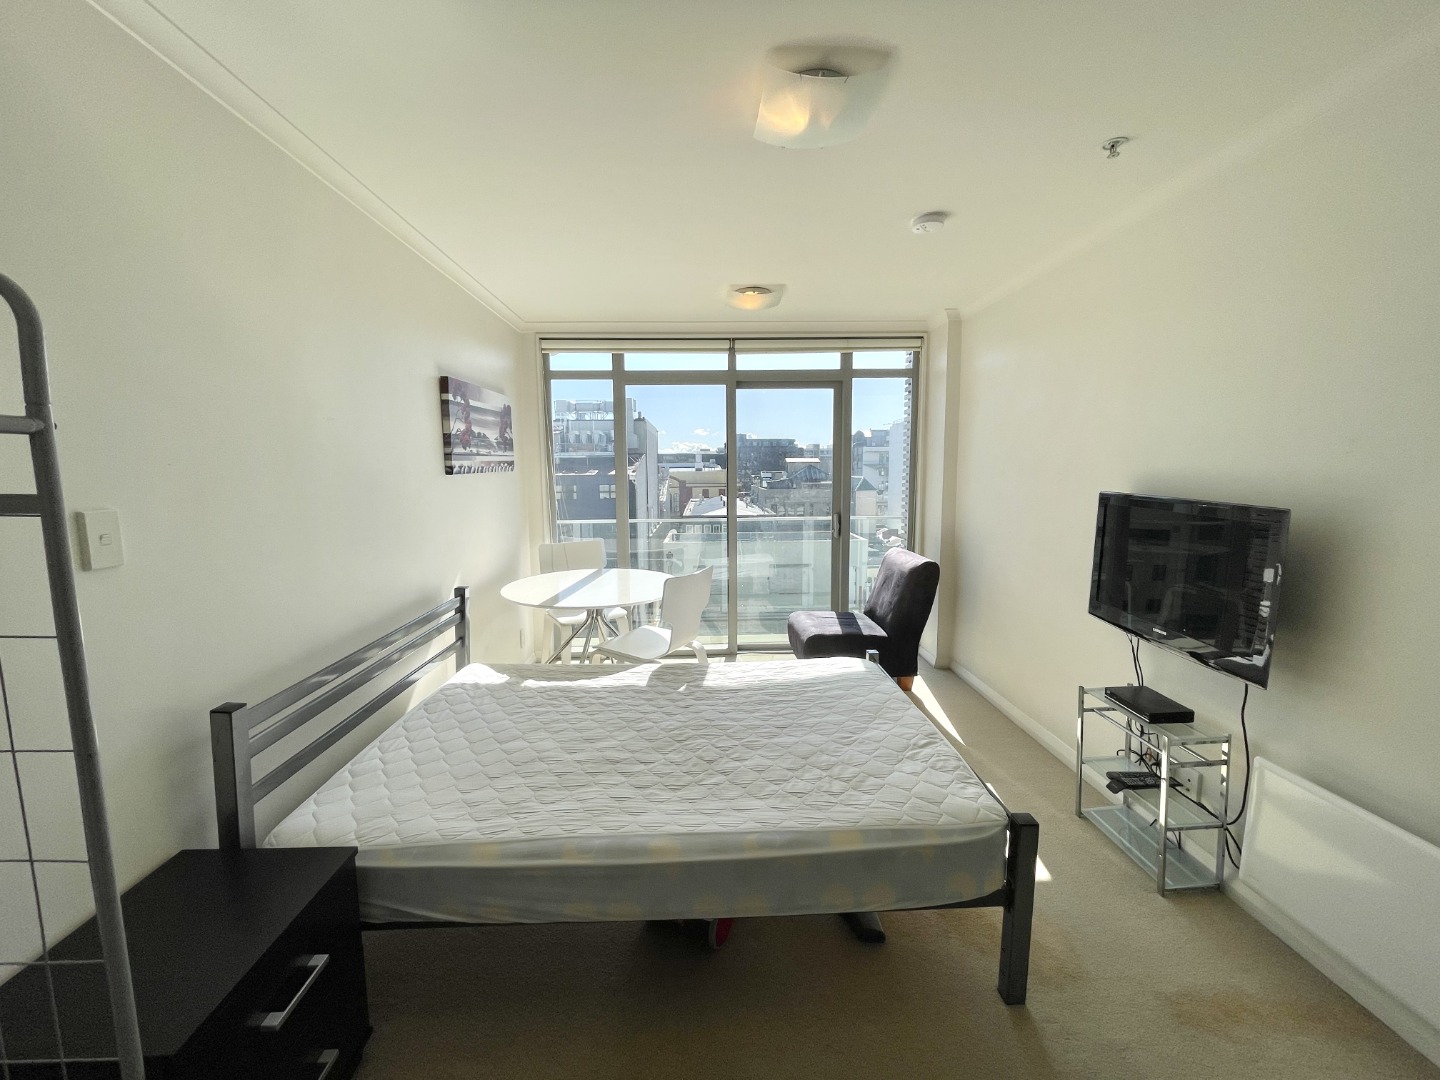 Real Estate For Rent Houses & Apartments : Studio Apartment on Holland St, Wellington